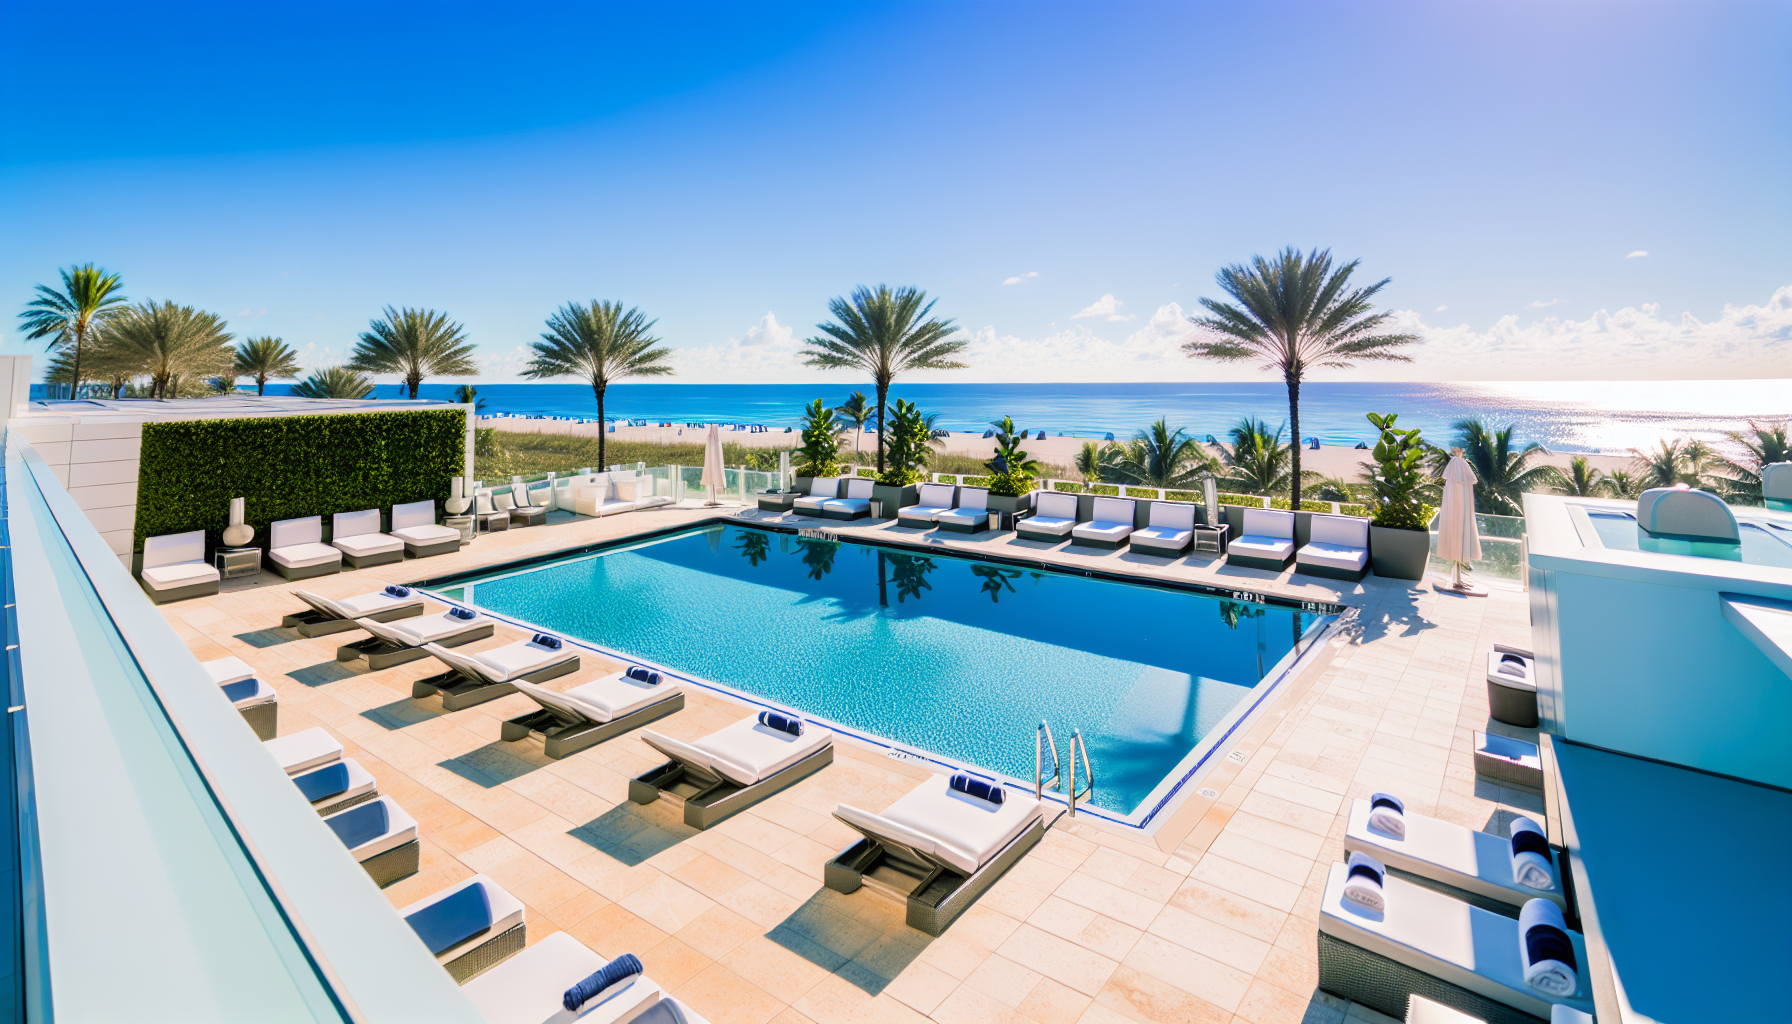 Luxurious rooftop pool overlooking Fort Lauderdale Beach at a hotel